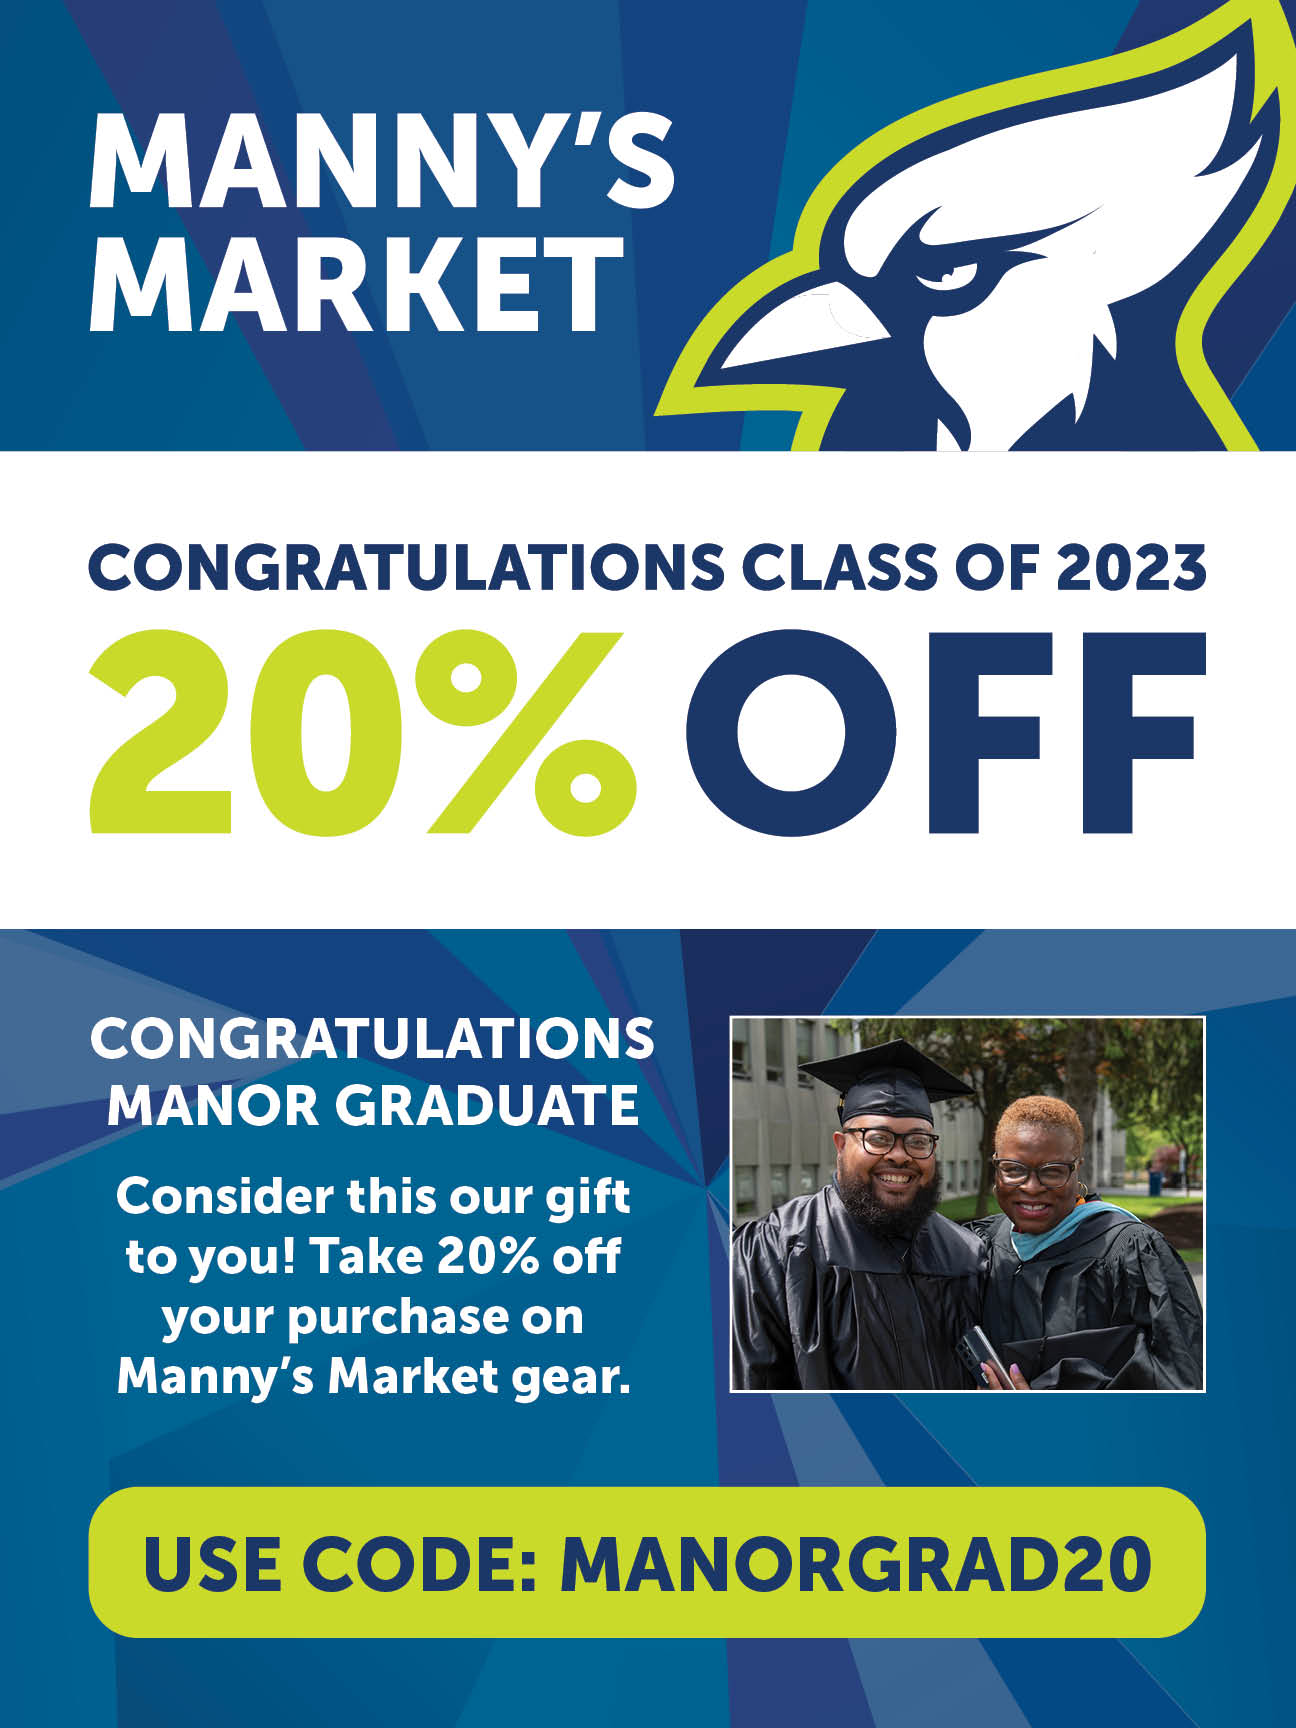 Link to Manny's Market discount code Manorgrad20